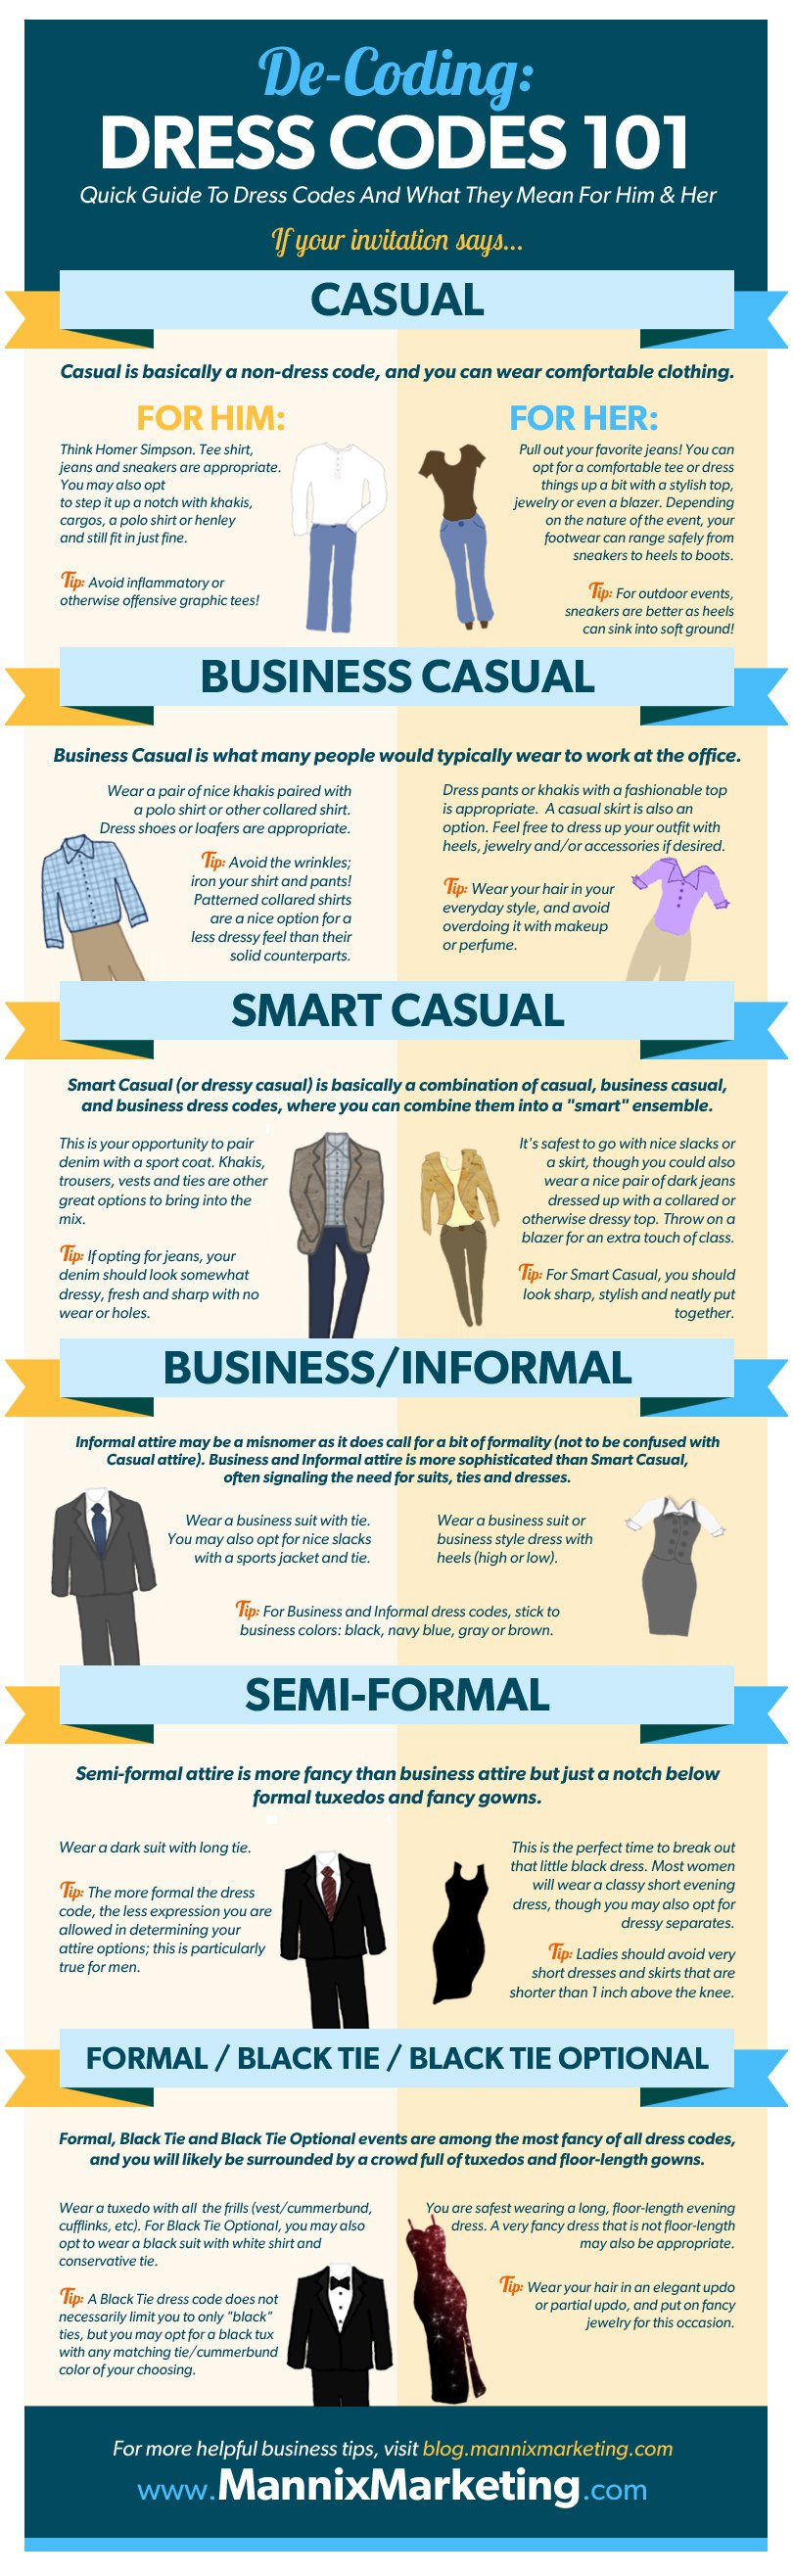 dress-codes2 You're Welcome!